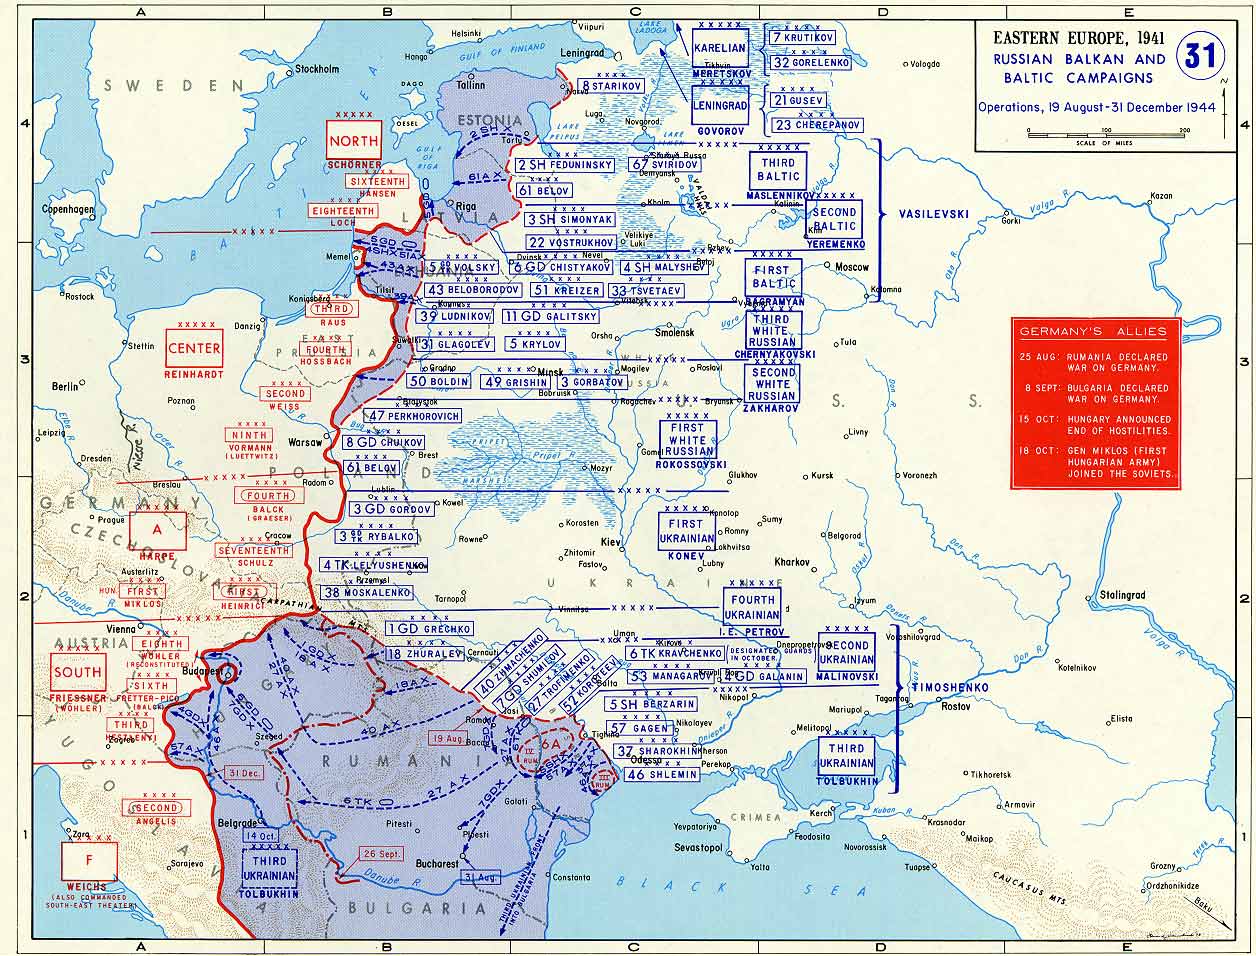 Map depicting Soviet advances in the Baltic States and Romania, 19 Aug-31 Dec 1944